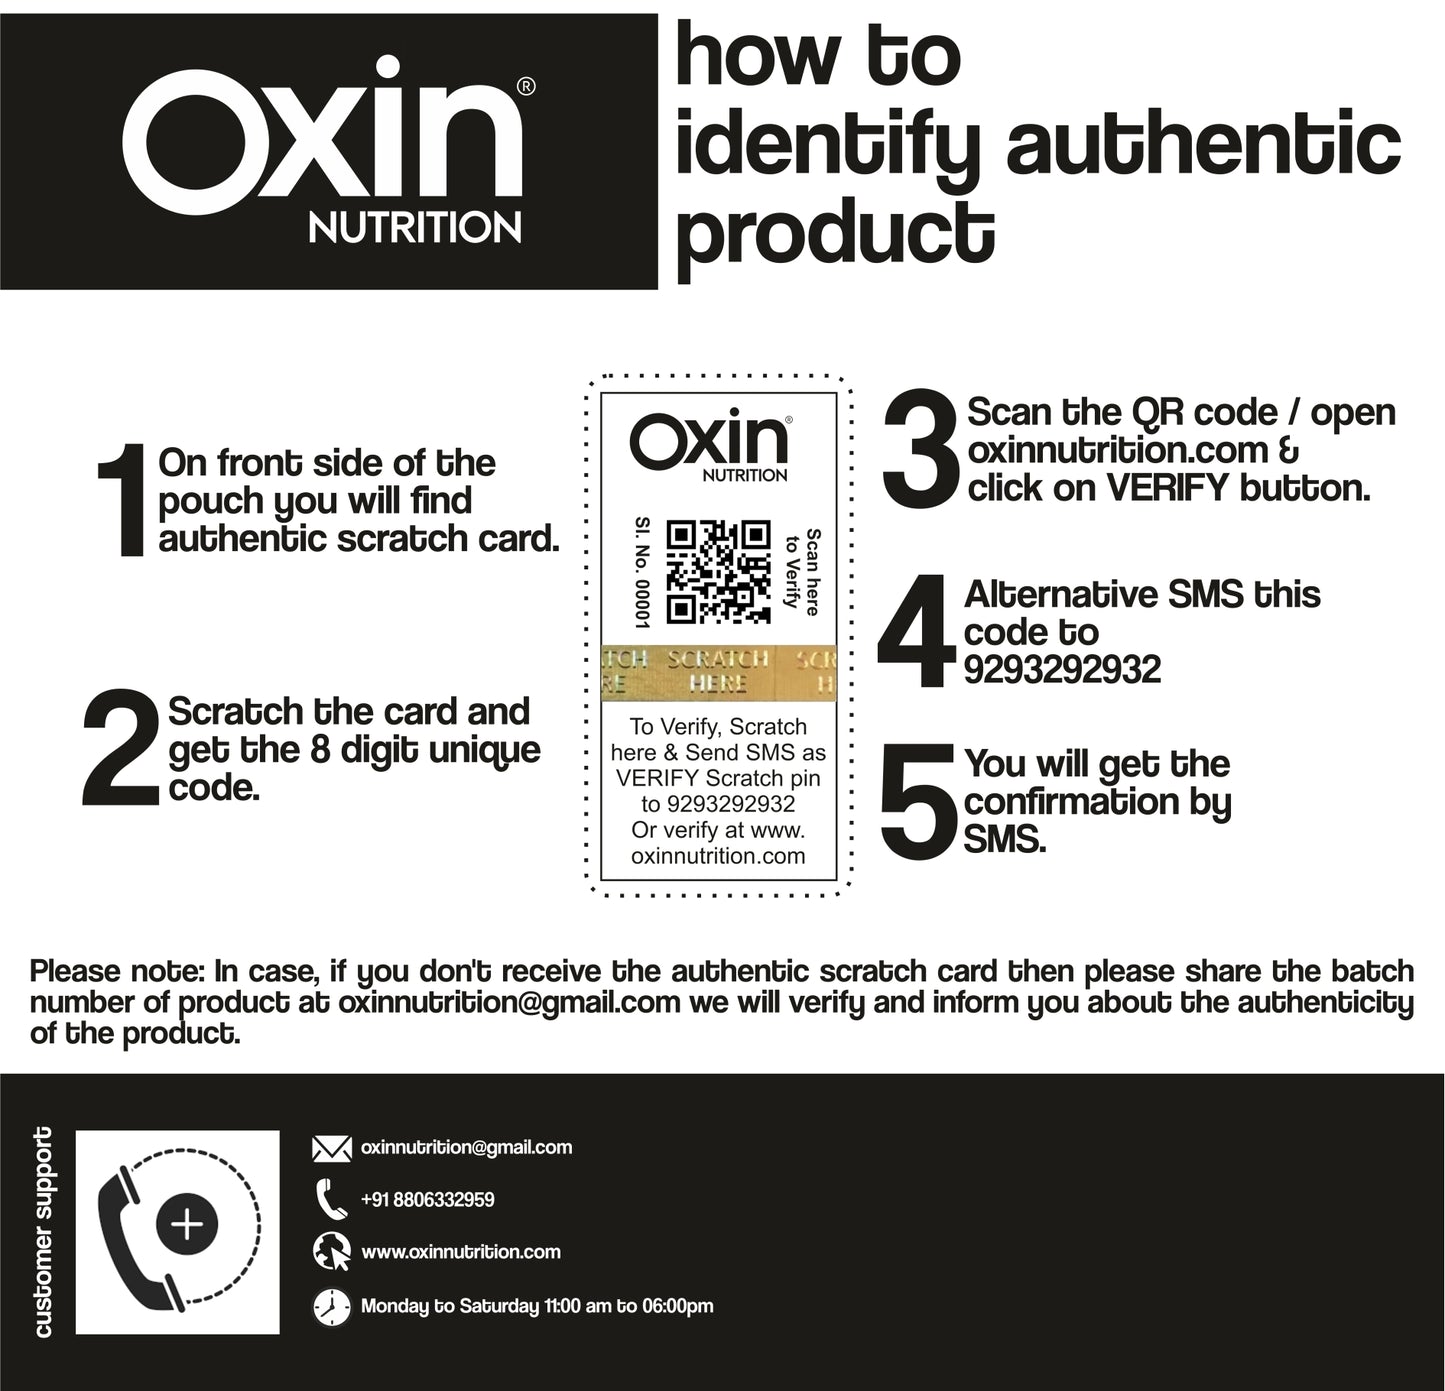 Oxin® Nutrition Yohimbine HCL 2.5mg Capsules